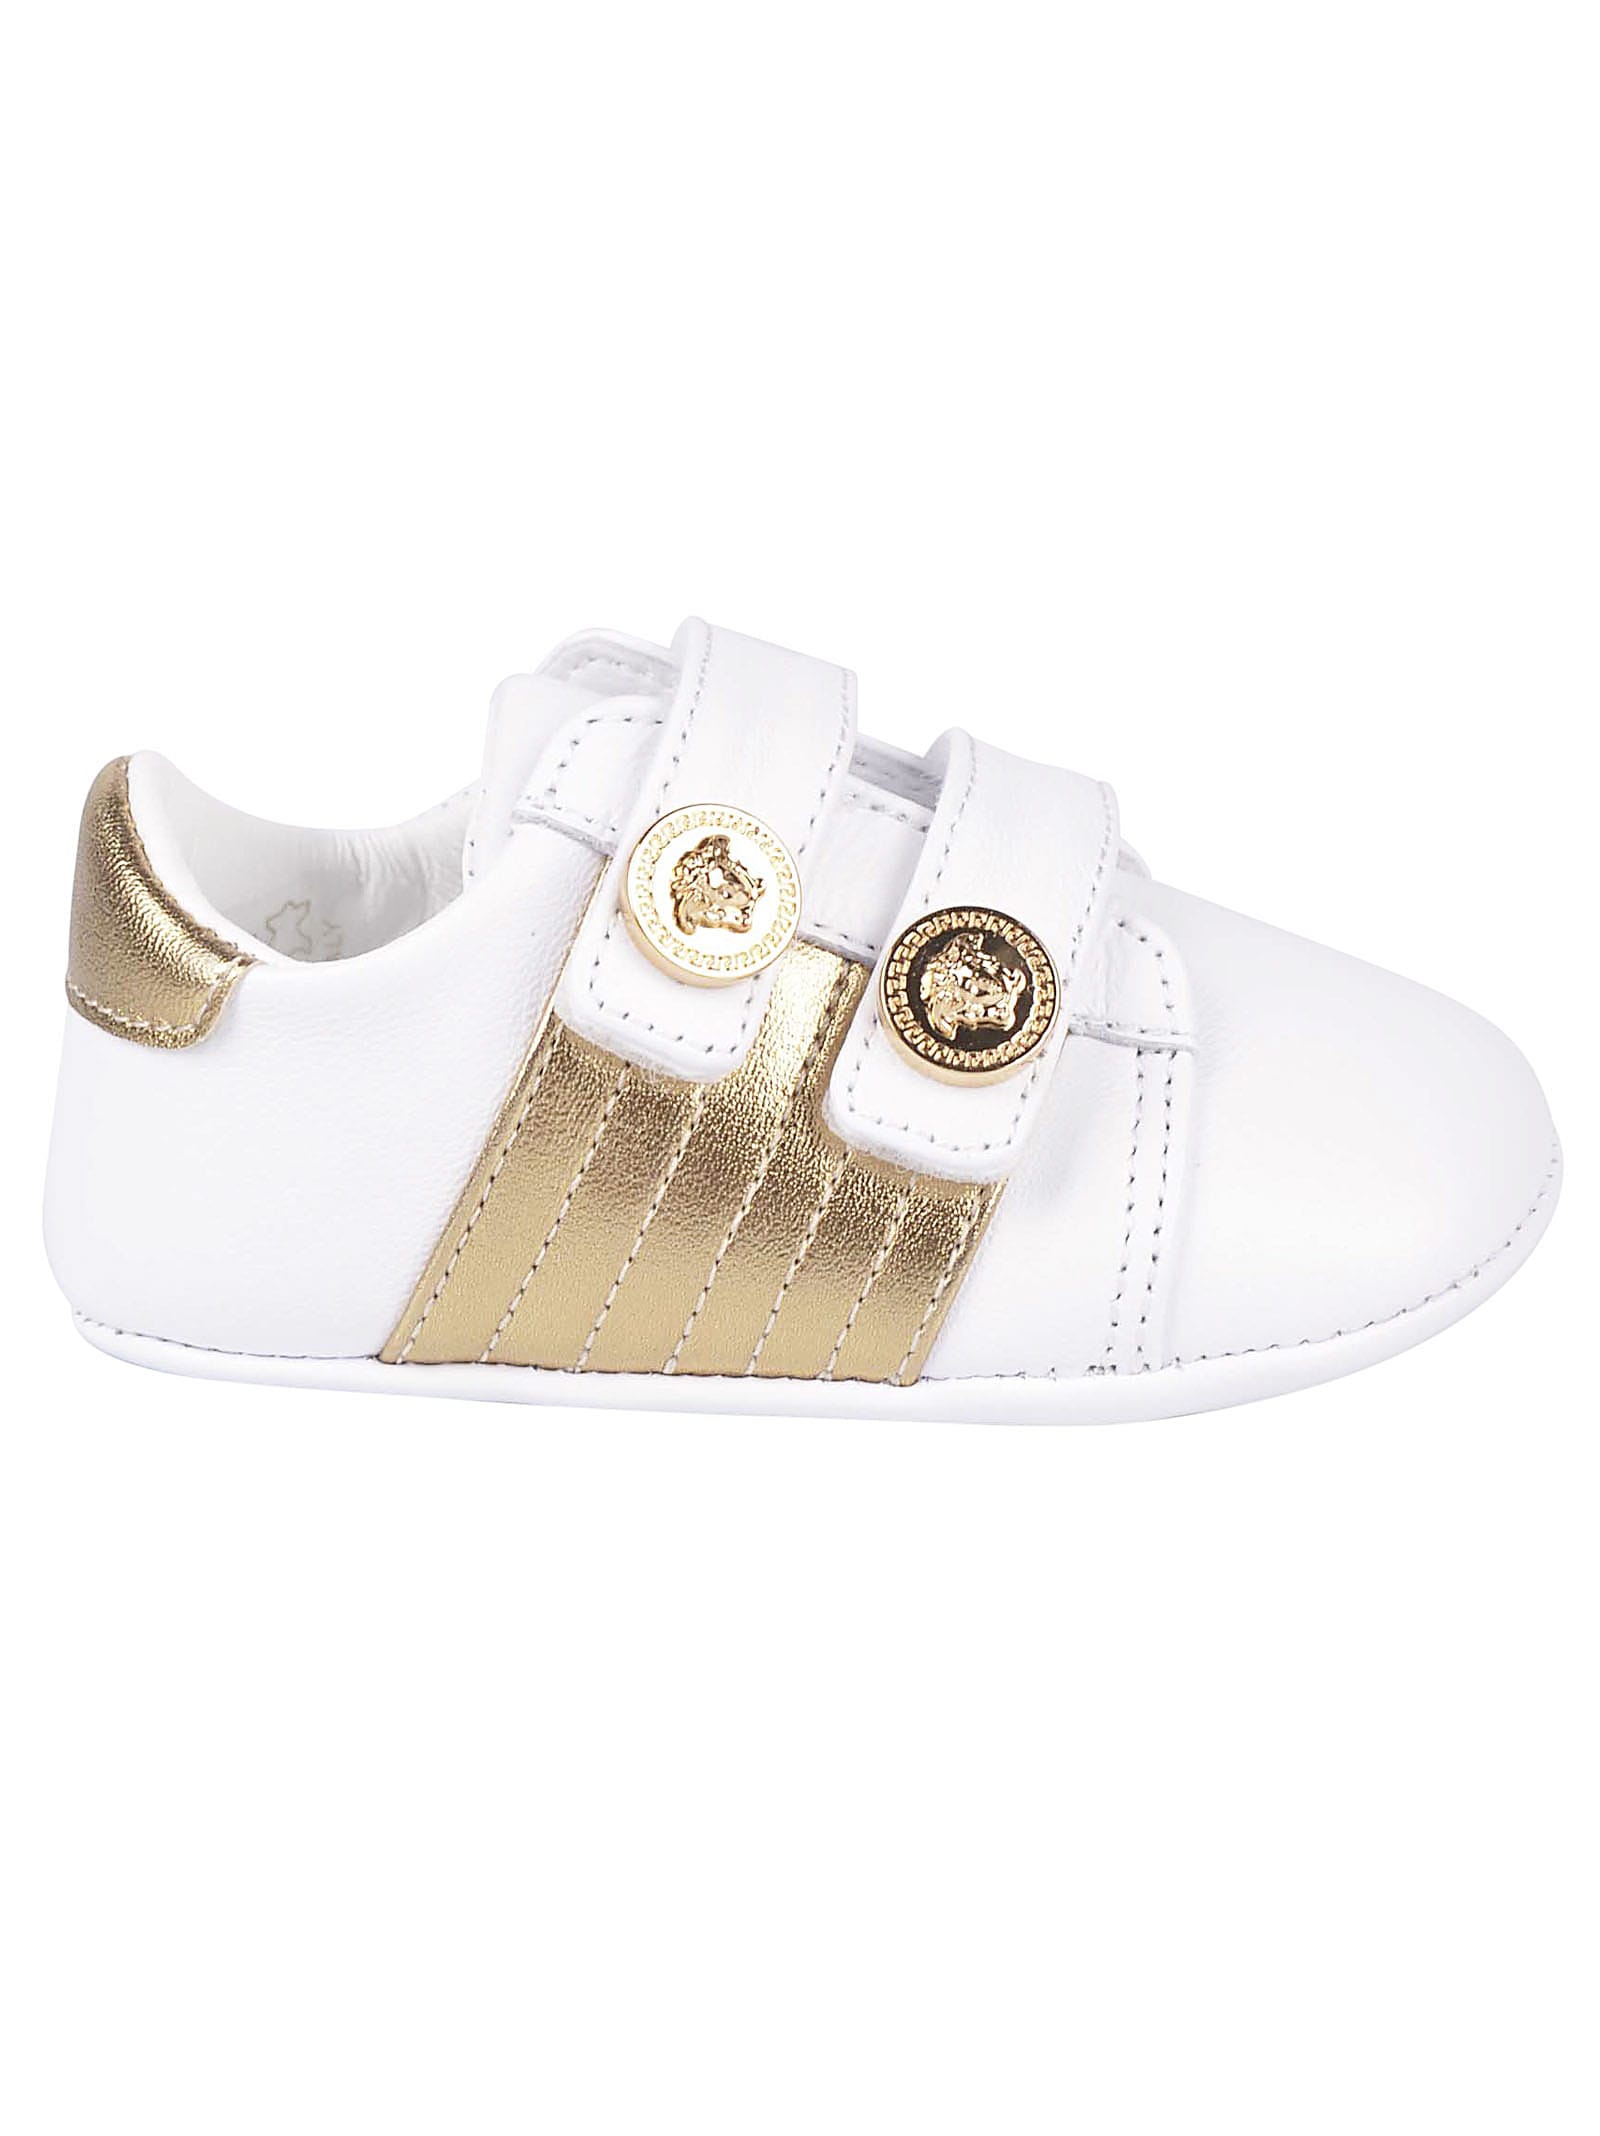 versace shoes white and gold